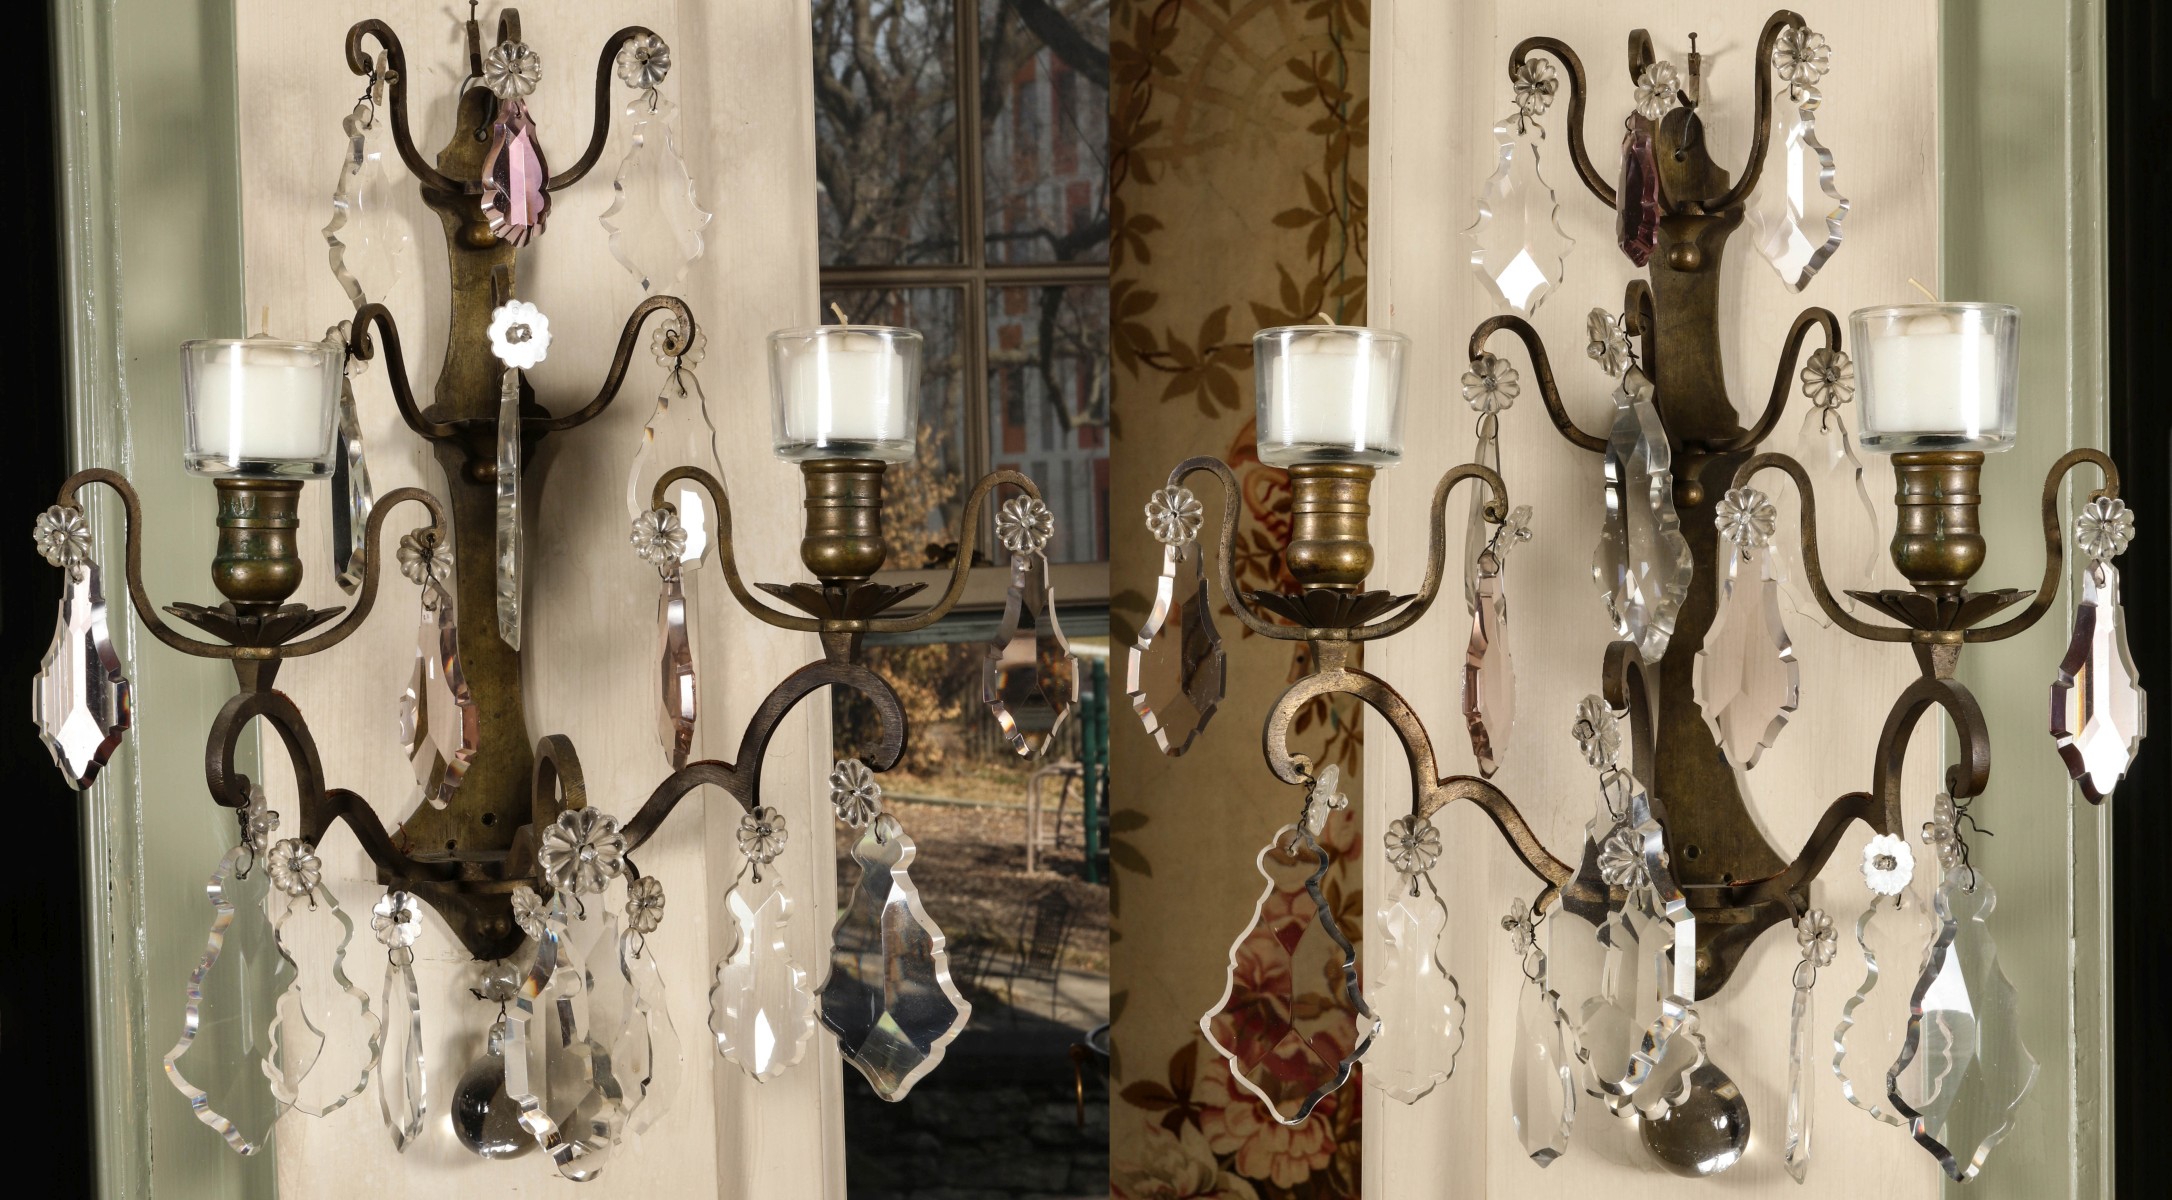 A PAIR FRENCH BRASS TWO-LIGHT SCONCES DRESSED IN PRISMS